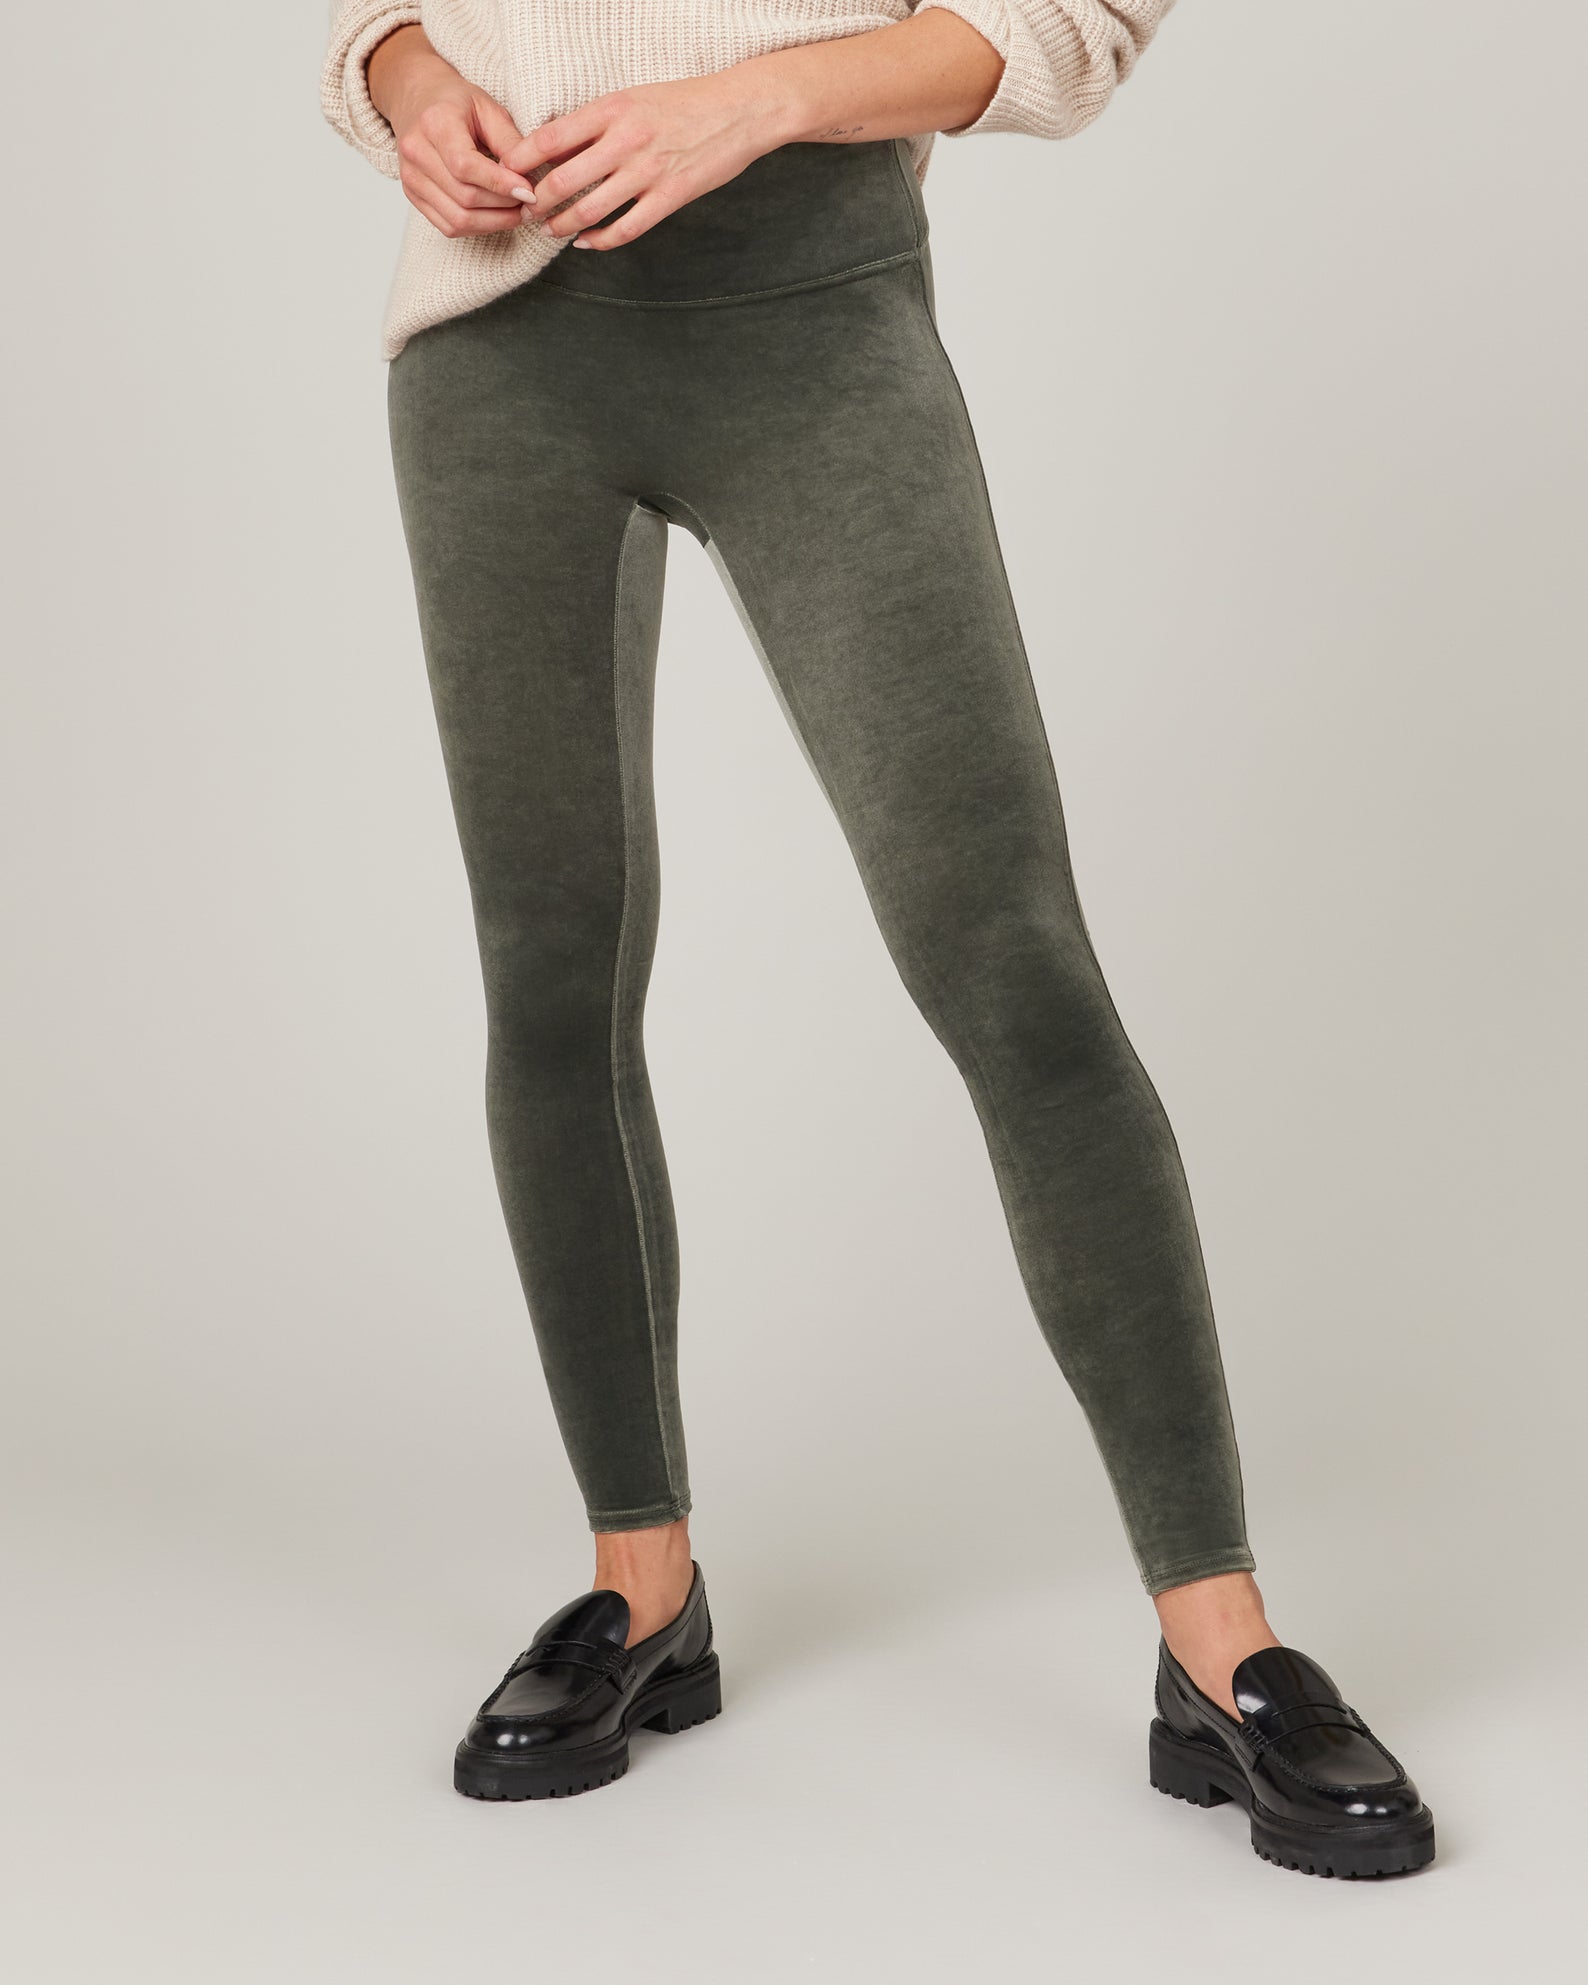 Spanx Faux Leather Leggings - PapillonStyles